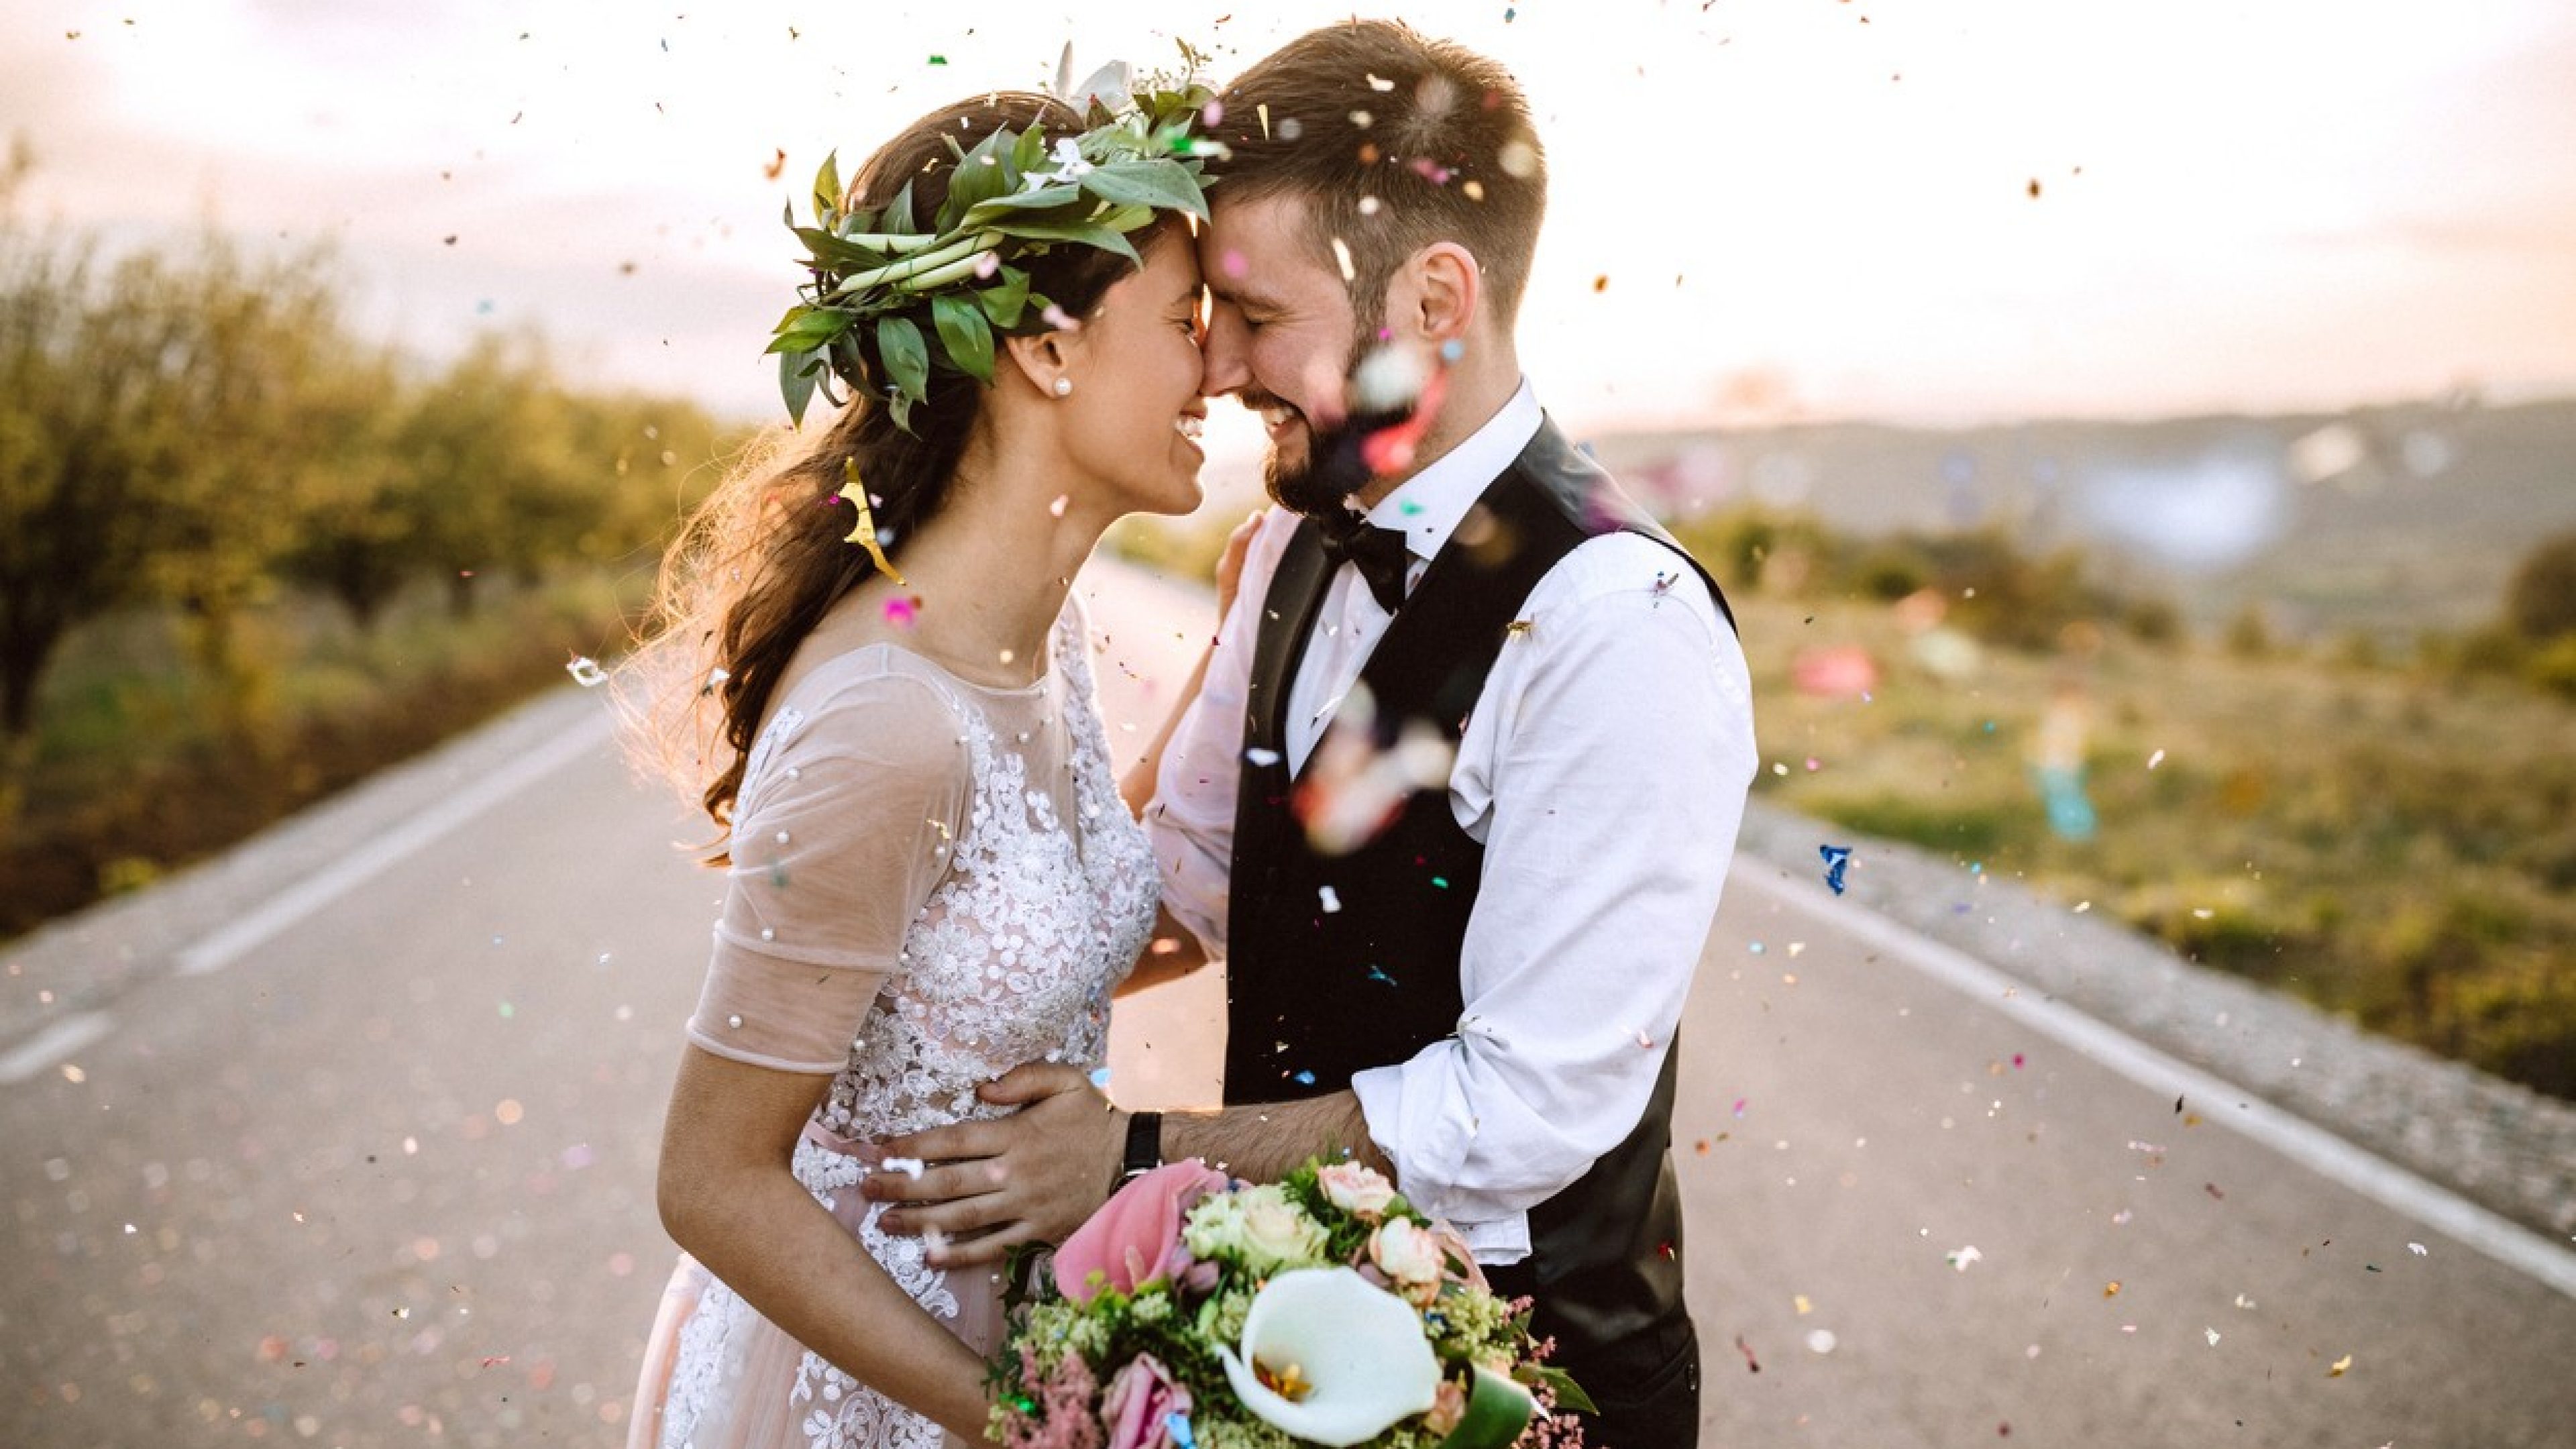 Newly married couple in love, dressed in wedding attire in the middle of a road, with confetti thrown over them.